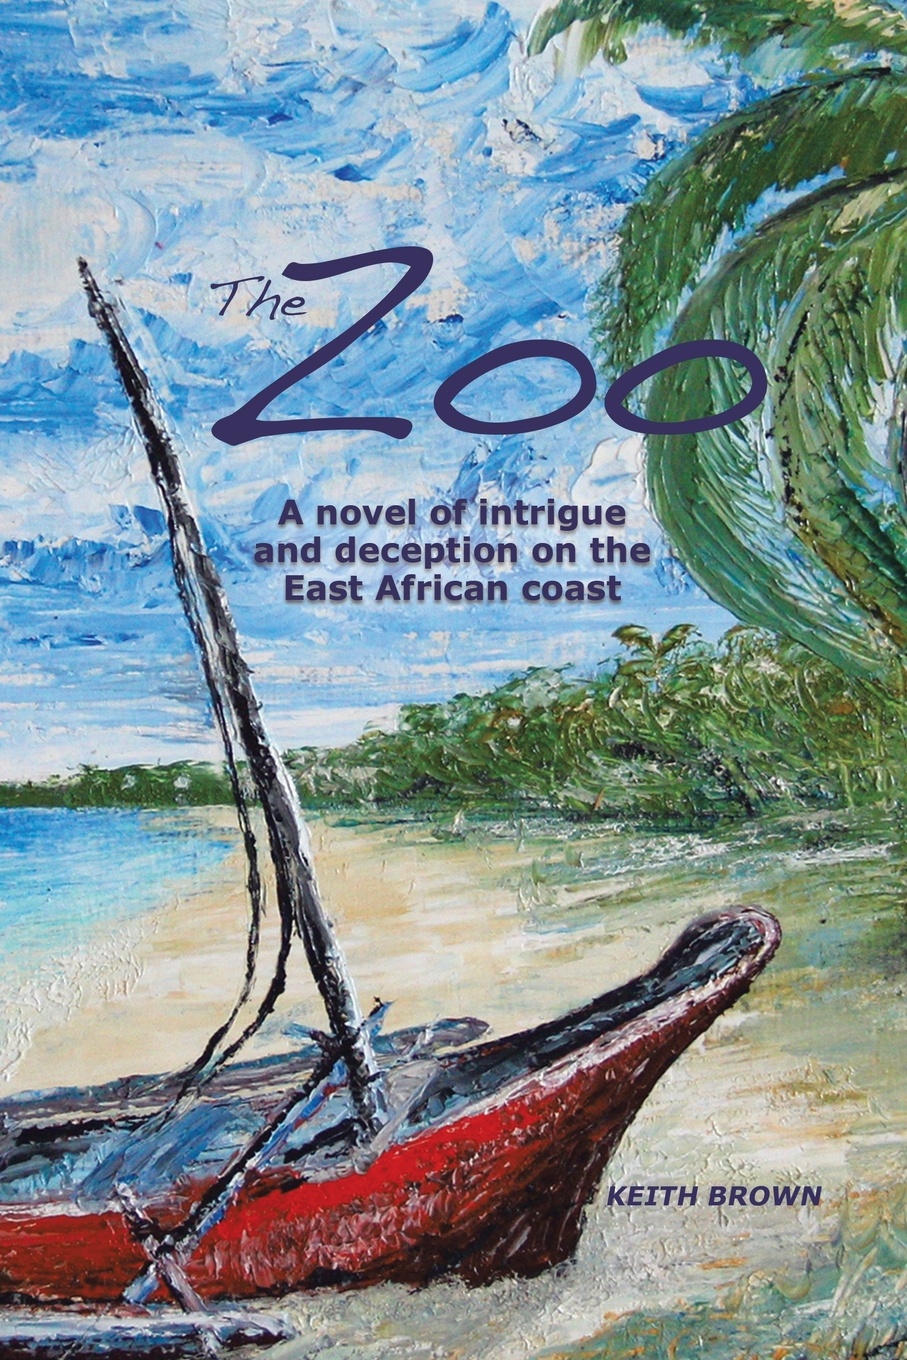 The Zoo. A novel of intrigue and deception on the East-African coast